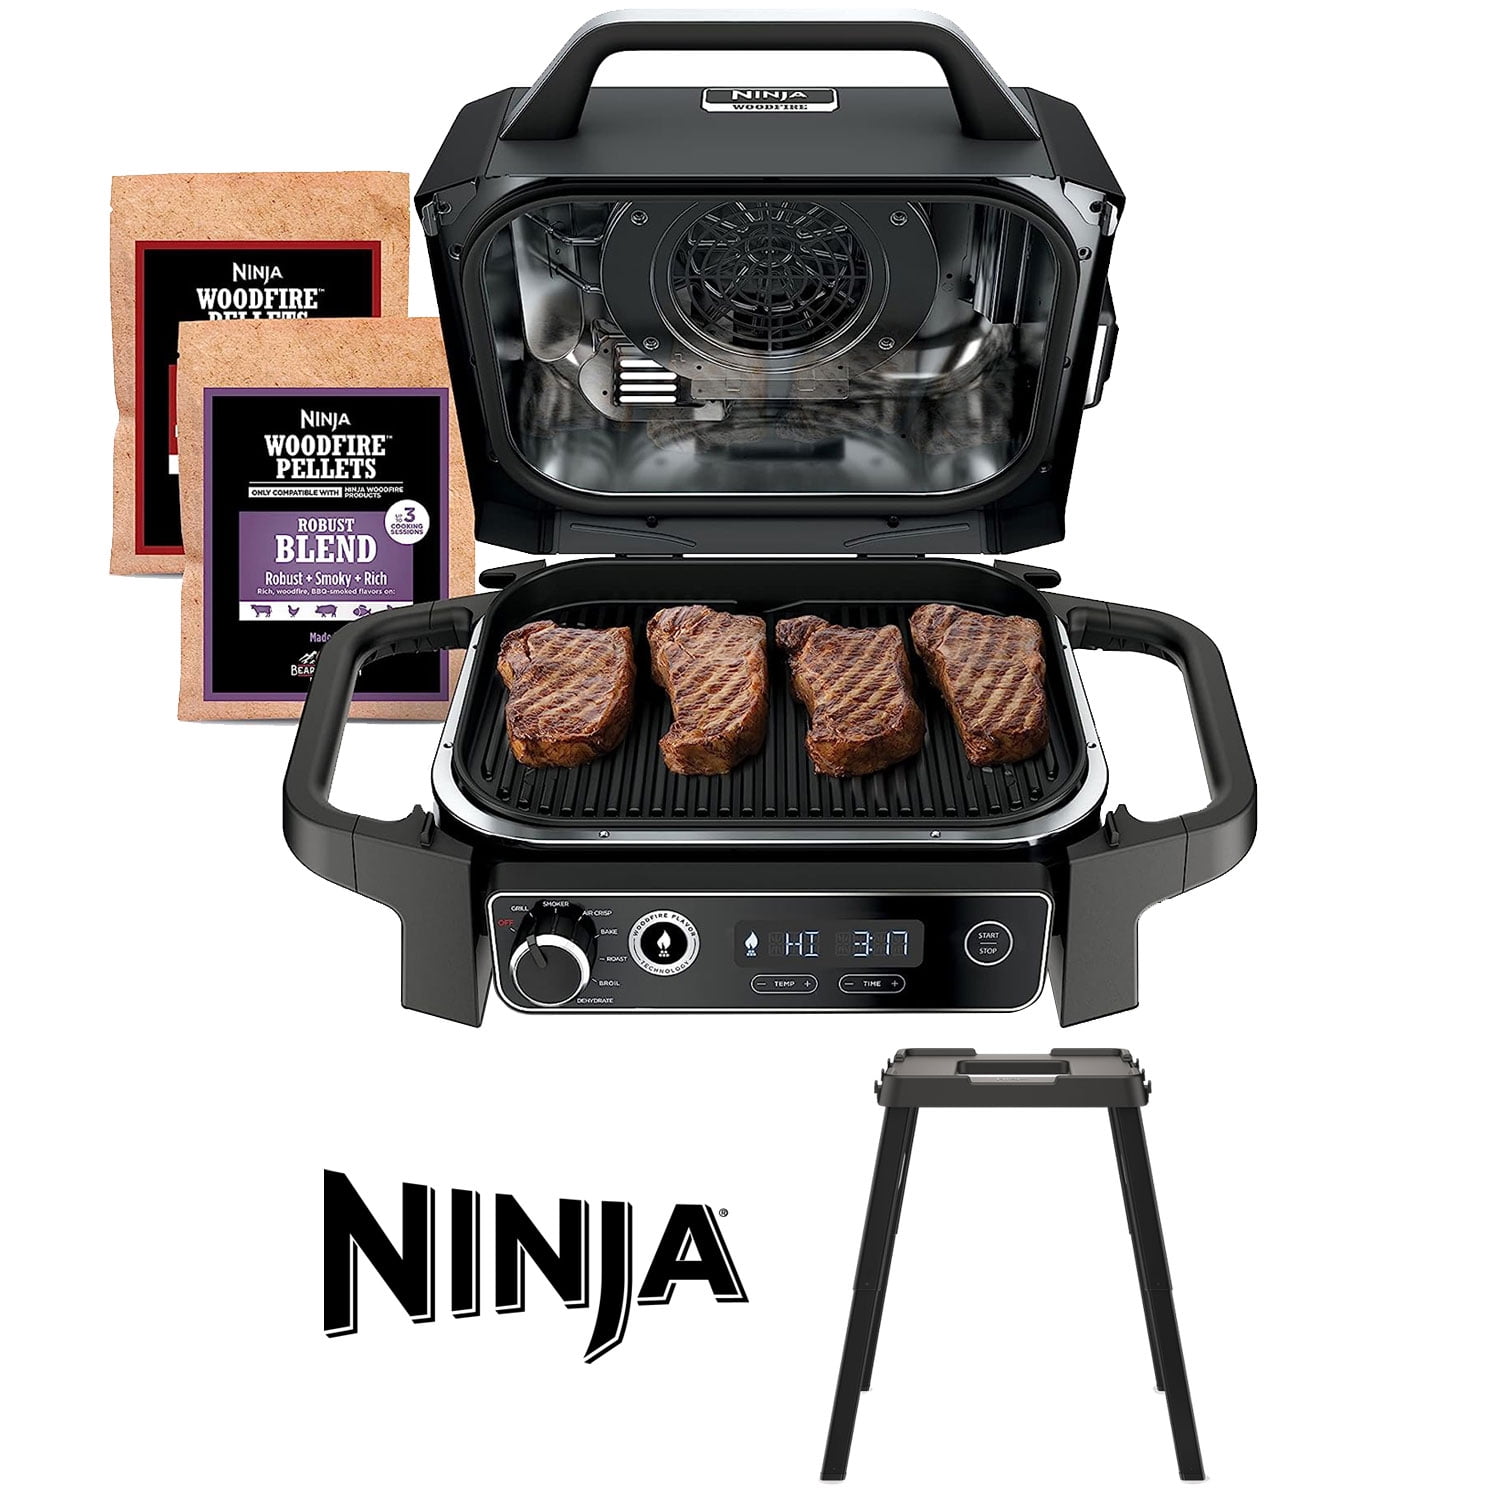 Ninja Woodfire Outdoor Grill in Red, OG701RD